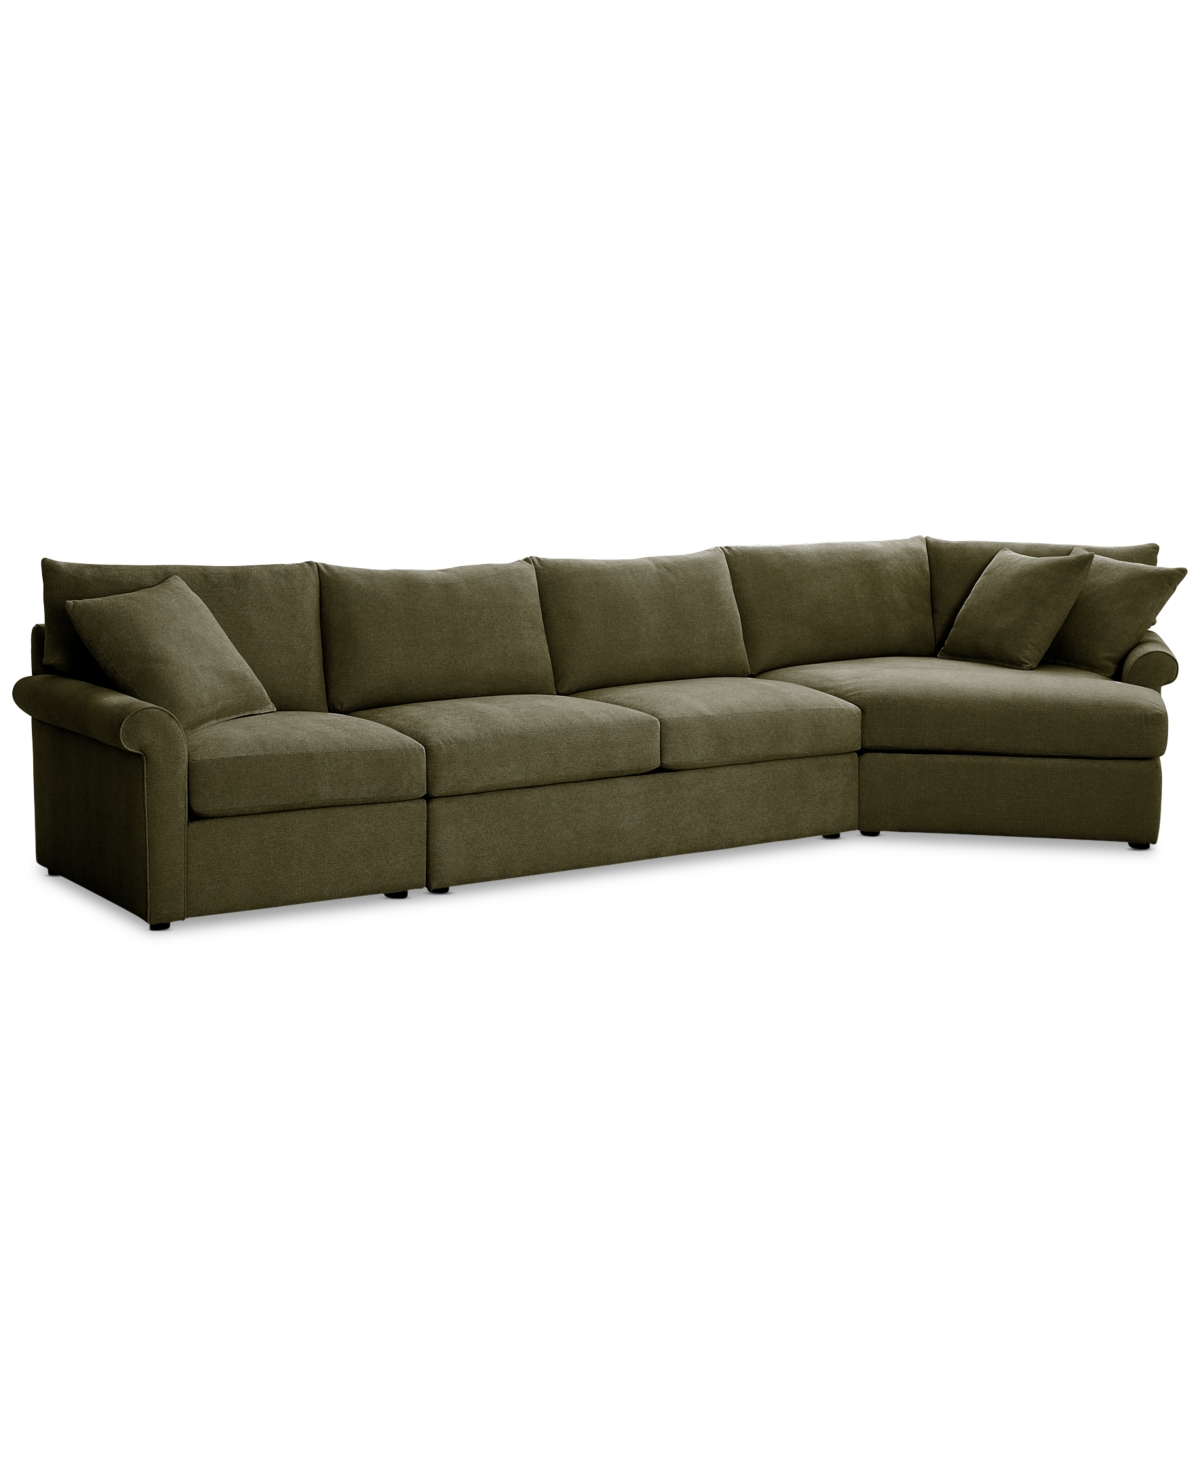 Furniture Wrenley 166" 3-pc. Fabric Cuddler Chaise Sectional Sofa, Created For Macy's In Olive